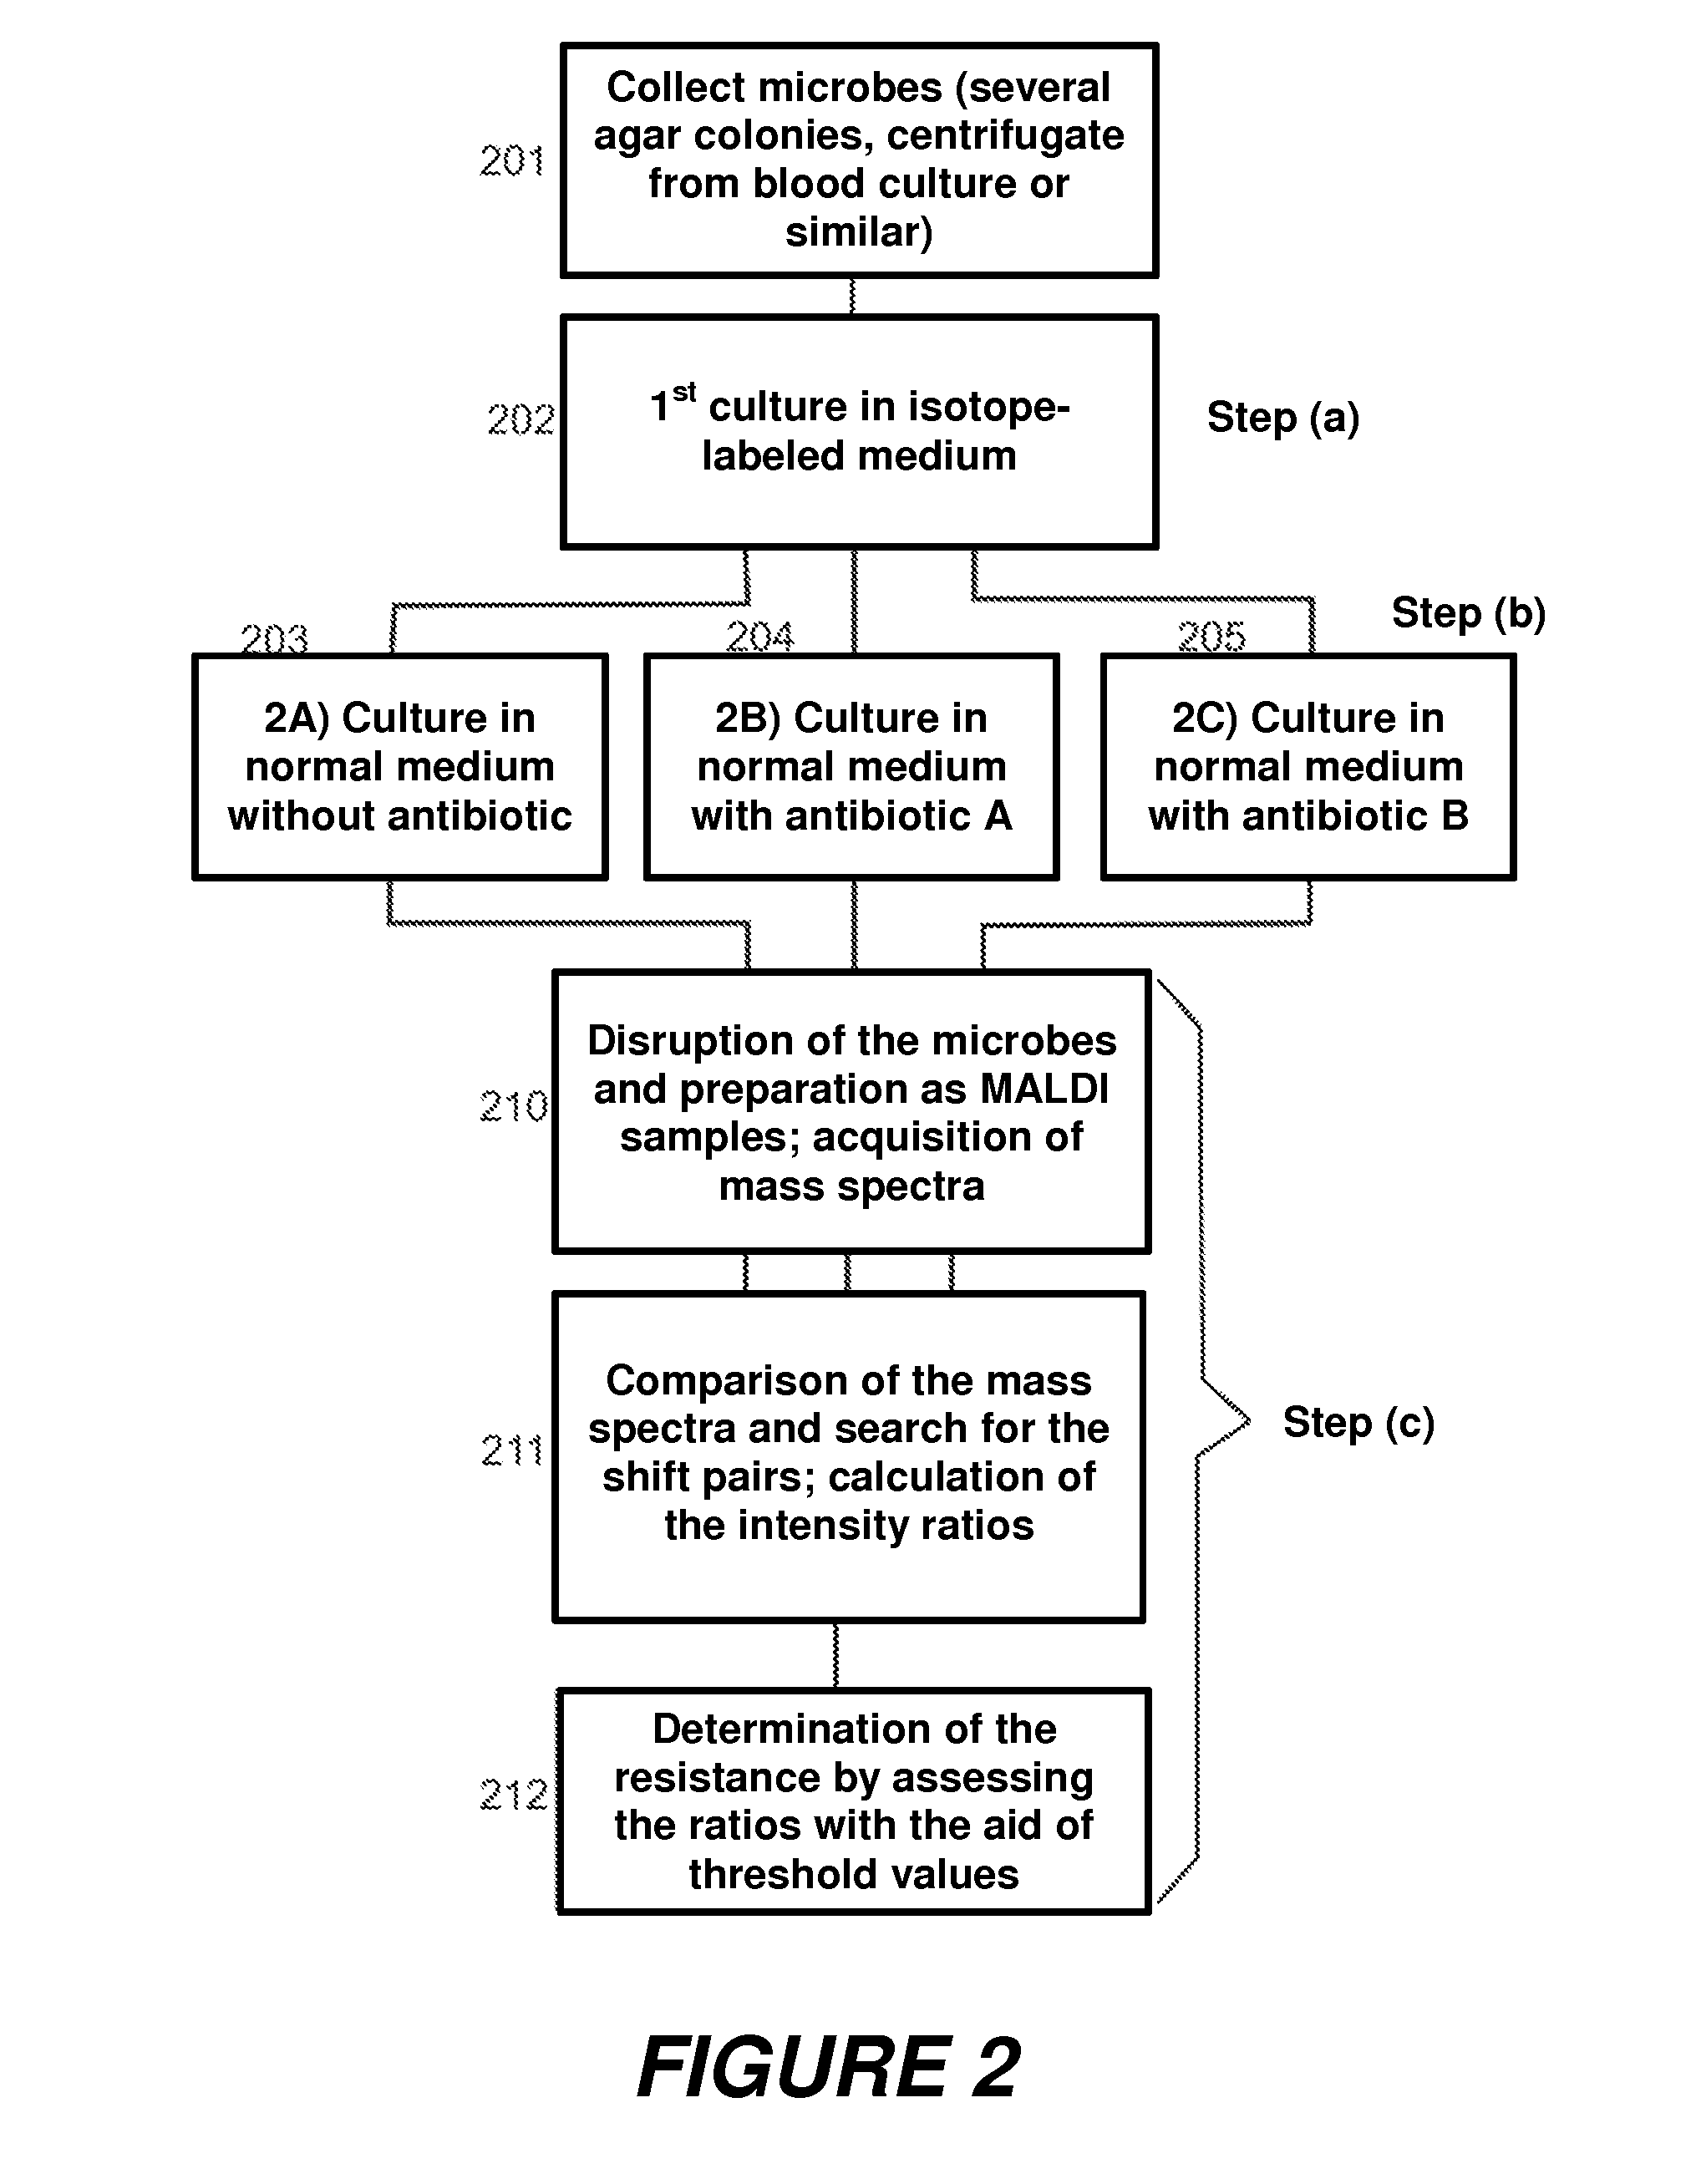 Mass spectrometric determination of microbial resistances